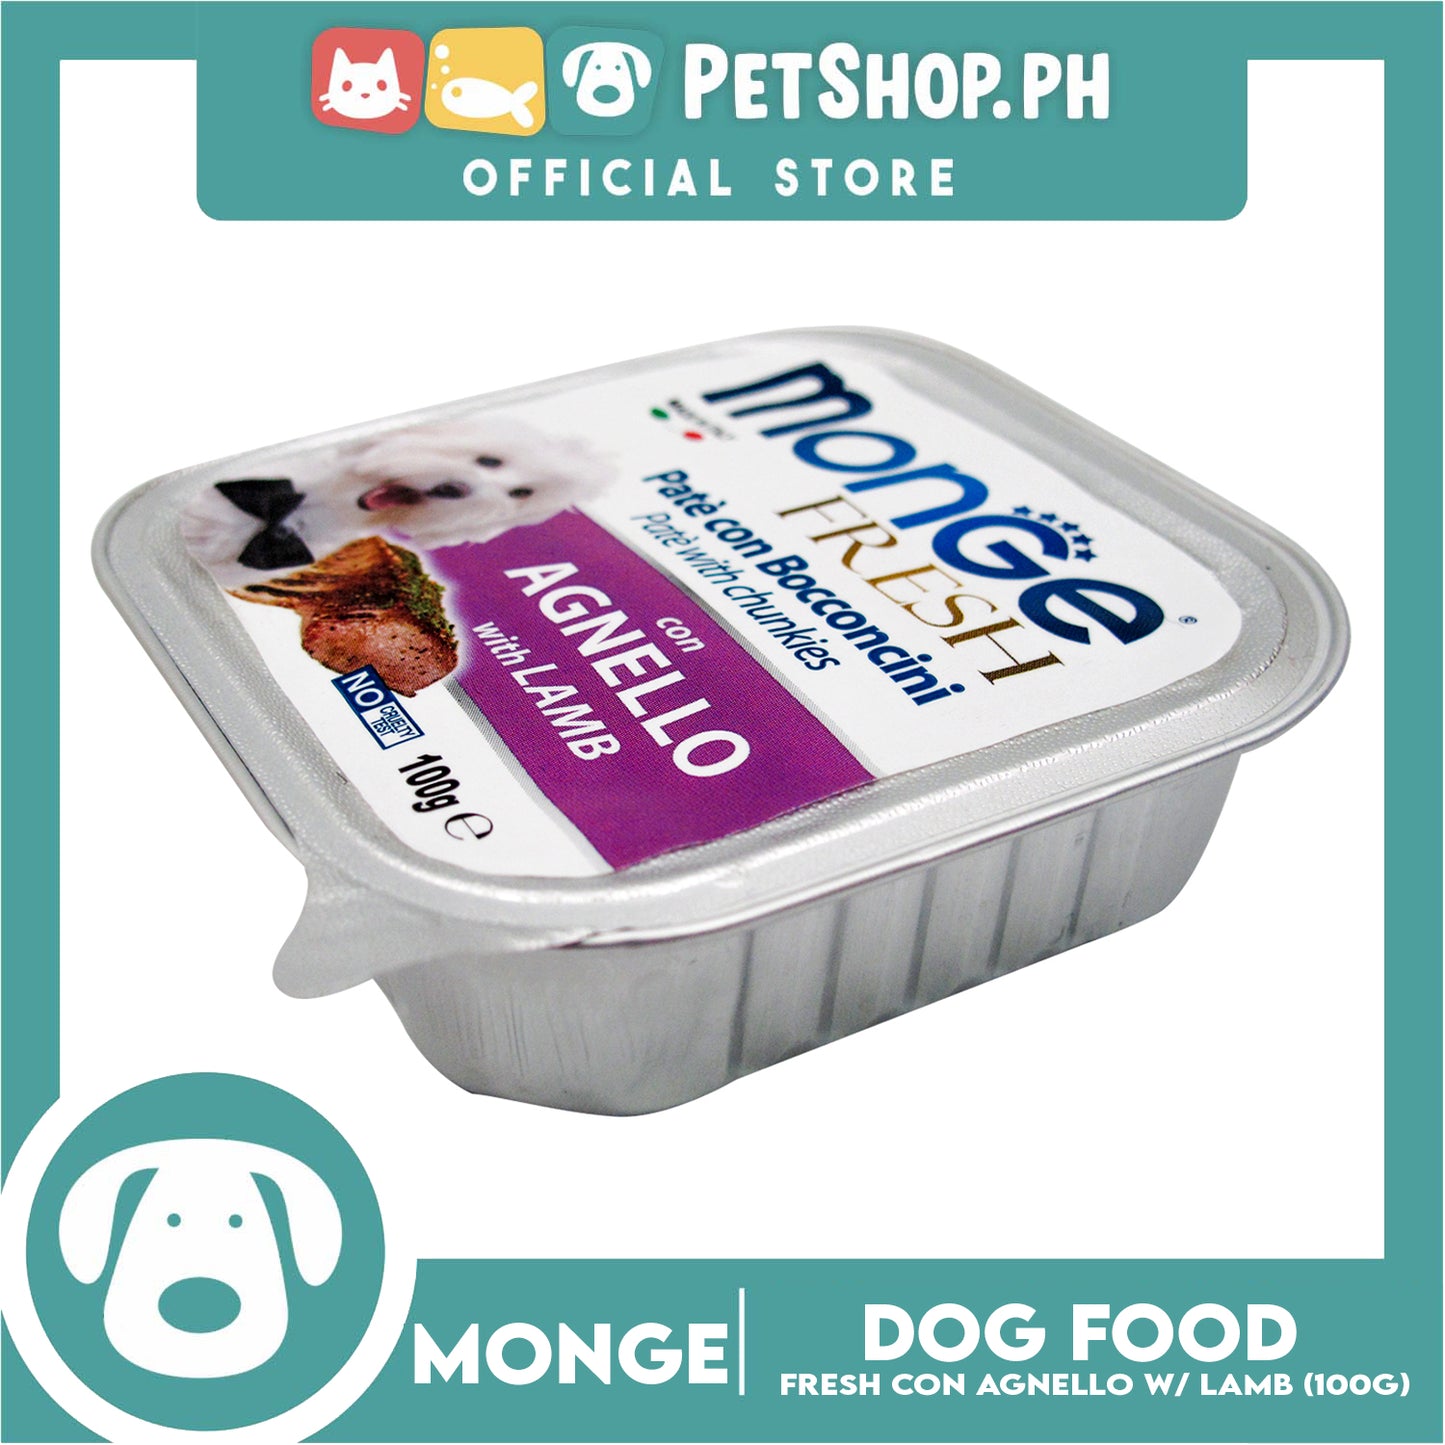 Monge Fresh Pate And Chunkies 100g (Agnello With Lamb) Dog Wet Food